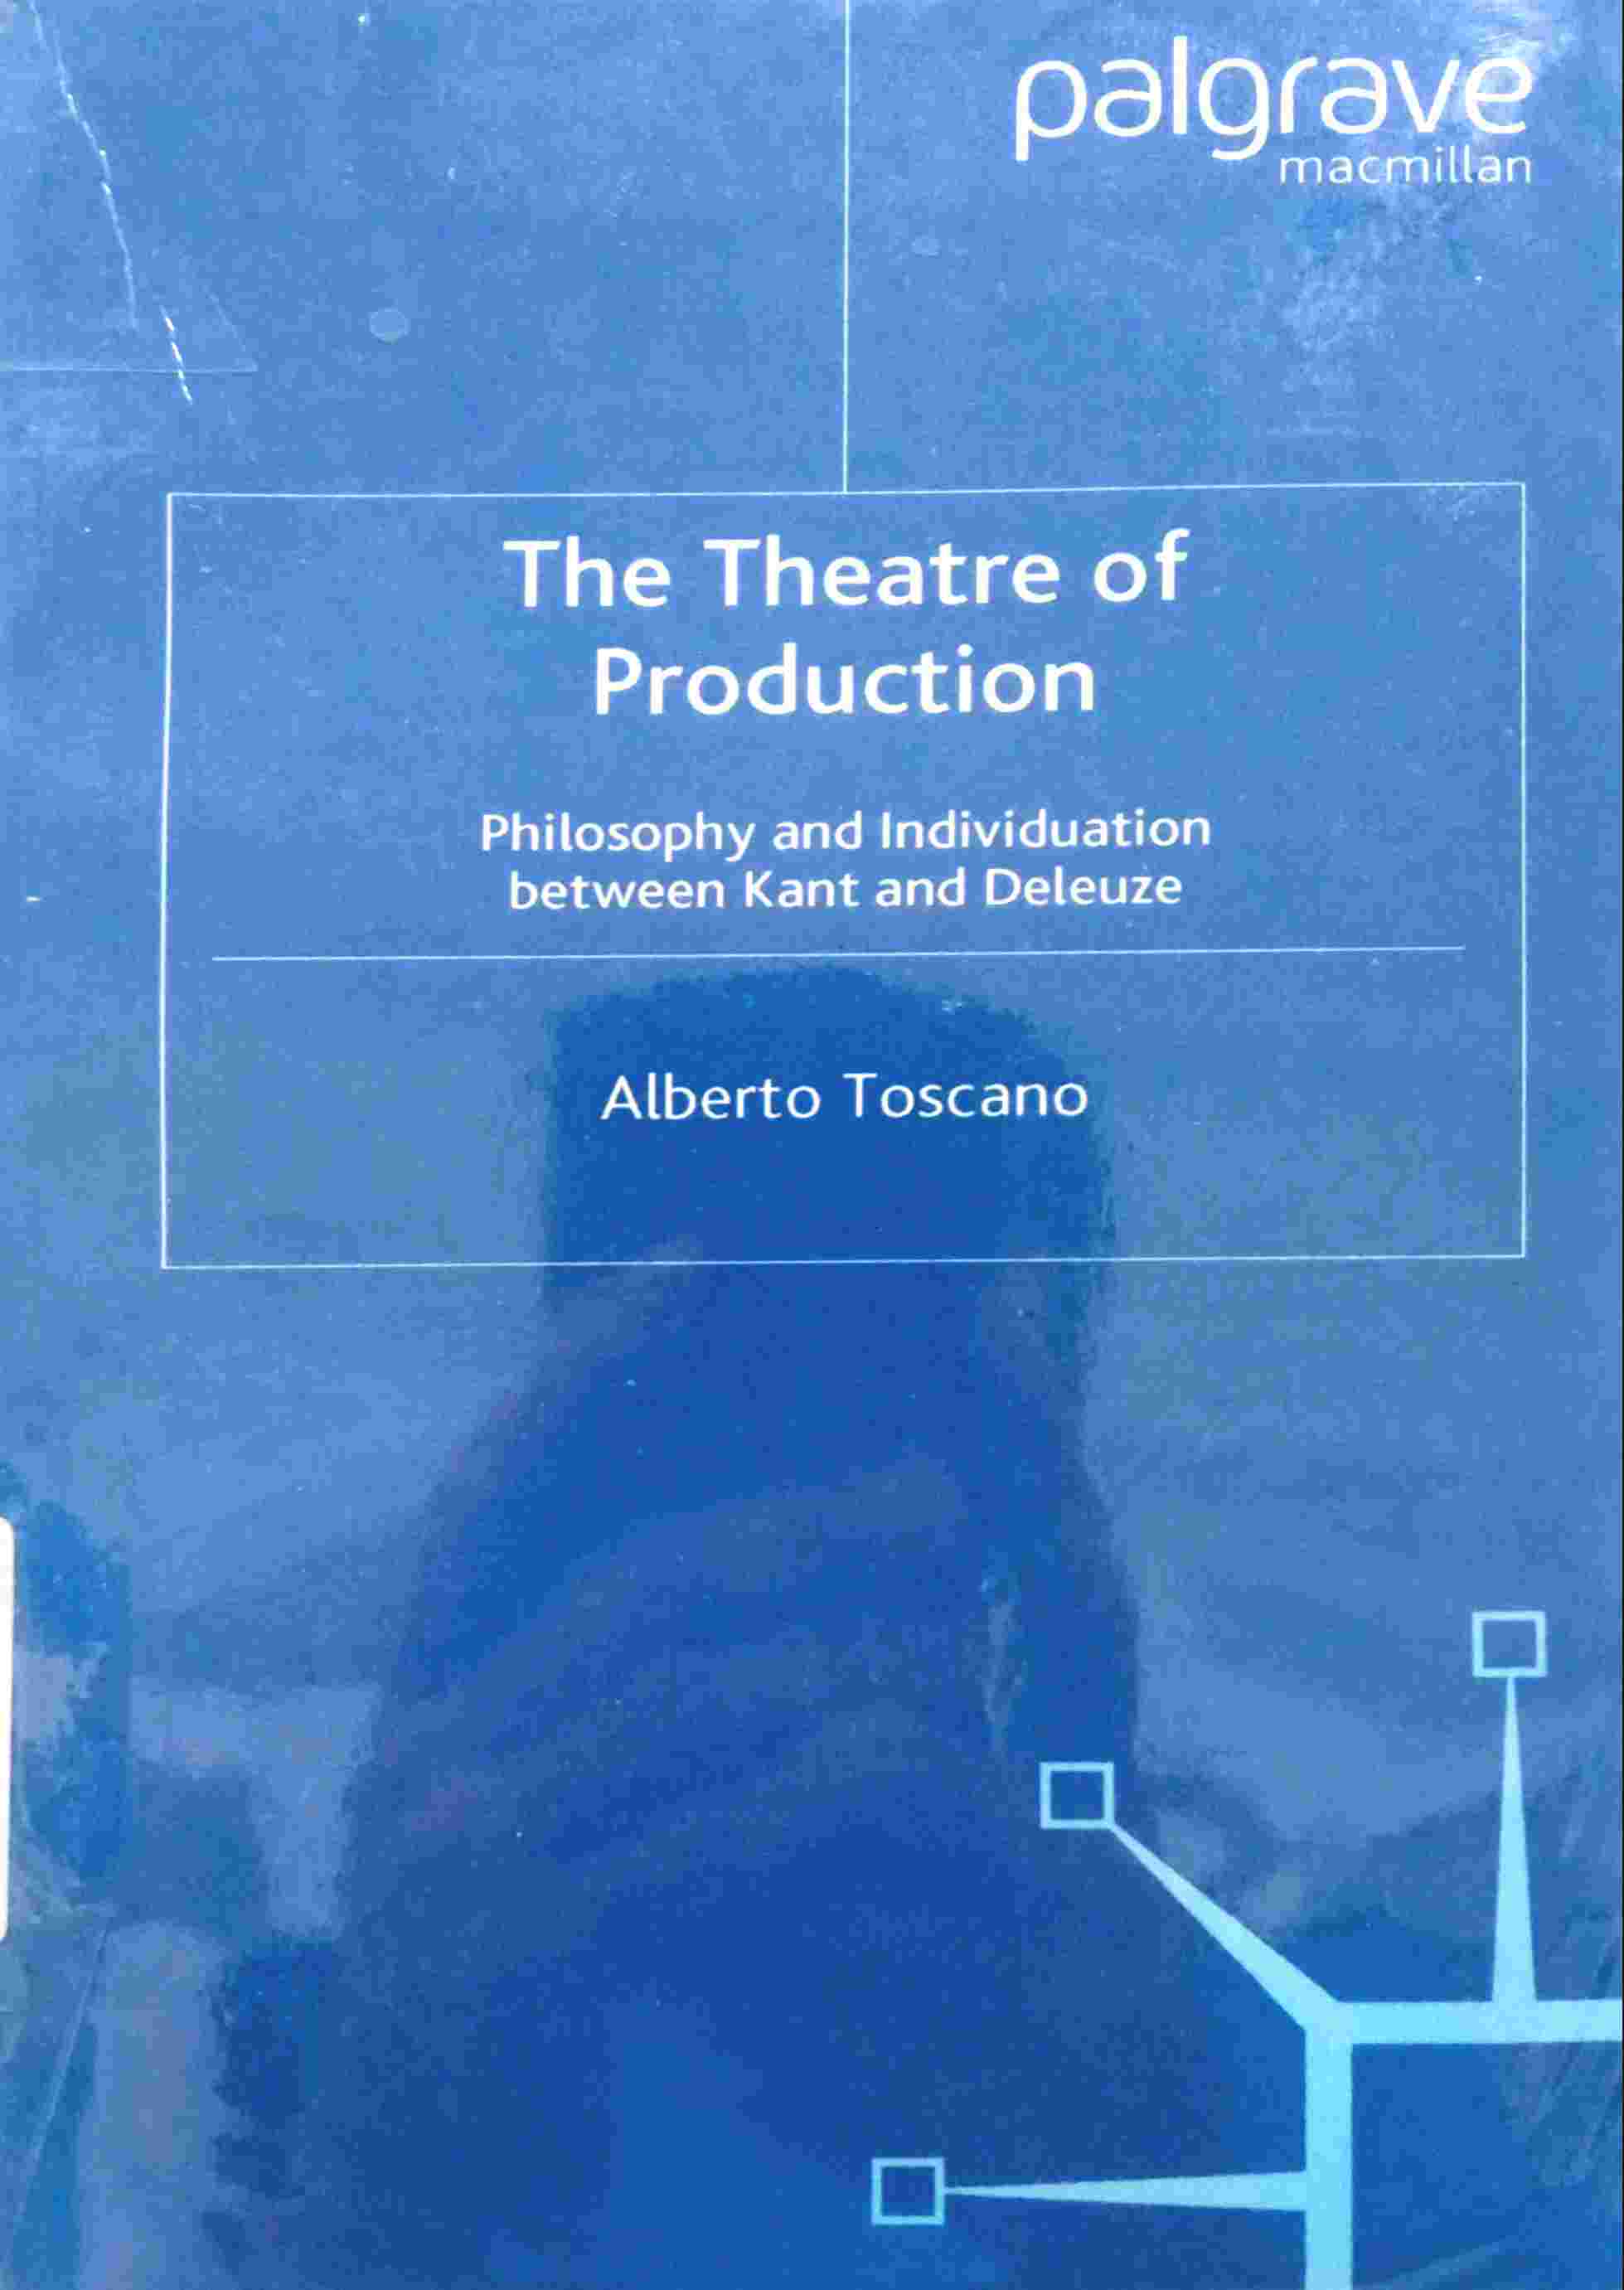 THE THEATRE OF PRODUCTION